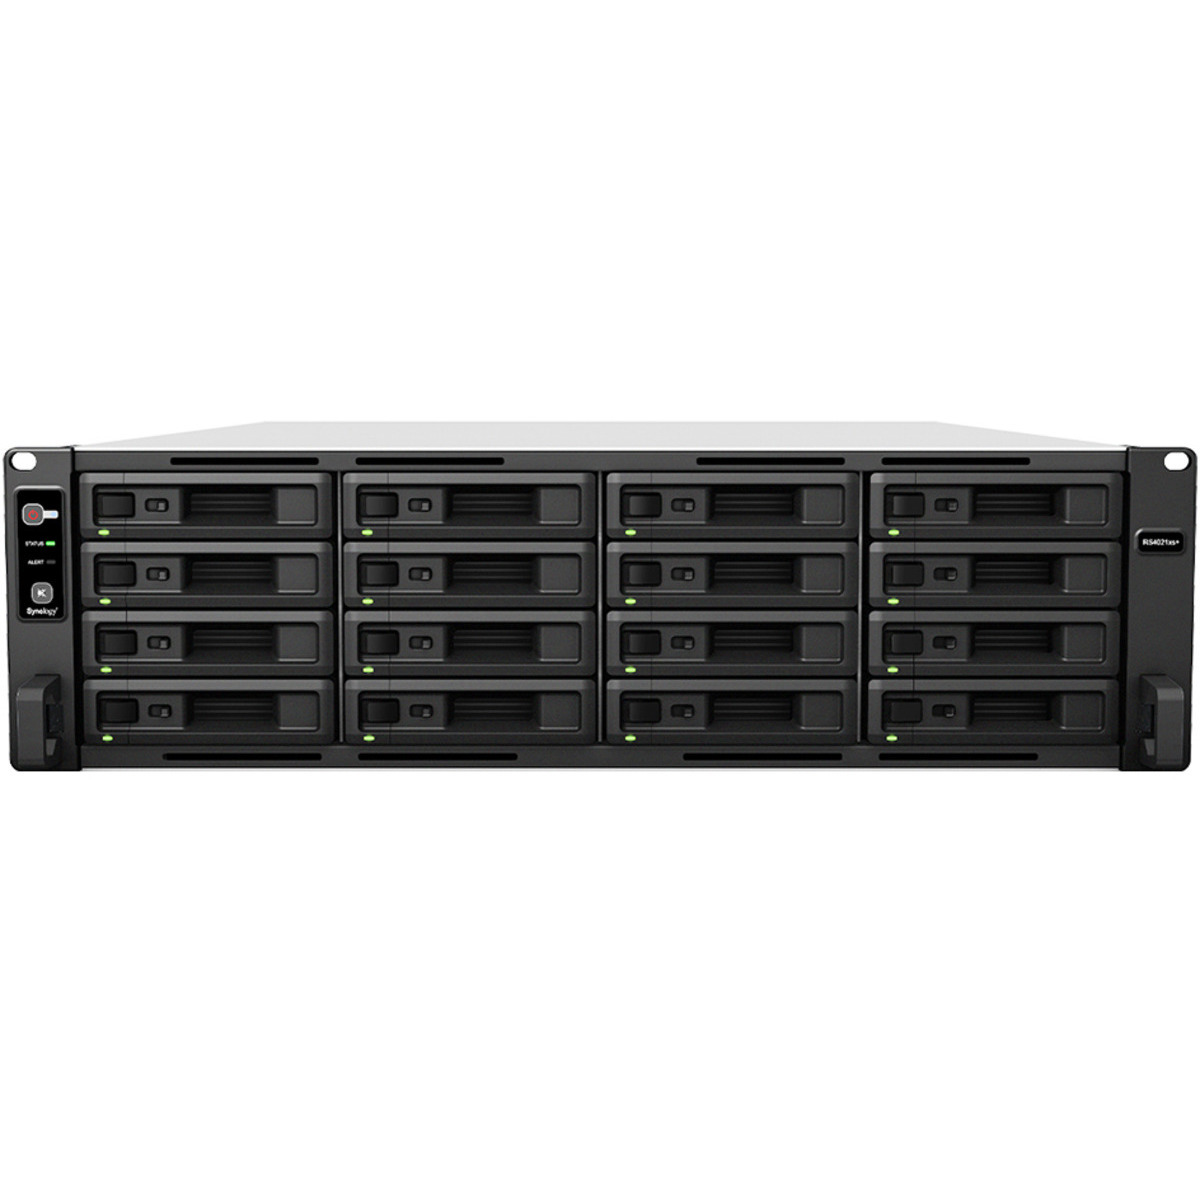 buy Synology RackStation RS4021xs+ 242tb RackMount NAS - Network Attached Storage Device 11x22000gb Western Digital Red Pro WD221KFGX 3.5 7200rpm SATA 6Gb/s HDD NAS Class Drives Installed - Burn-In Tested - nas headquarters buy network attached storage server device das new raid-5 free shipping simply usa RackStation RS4021xs+